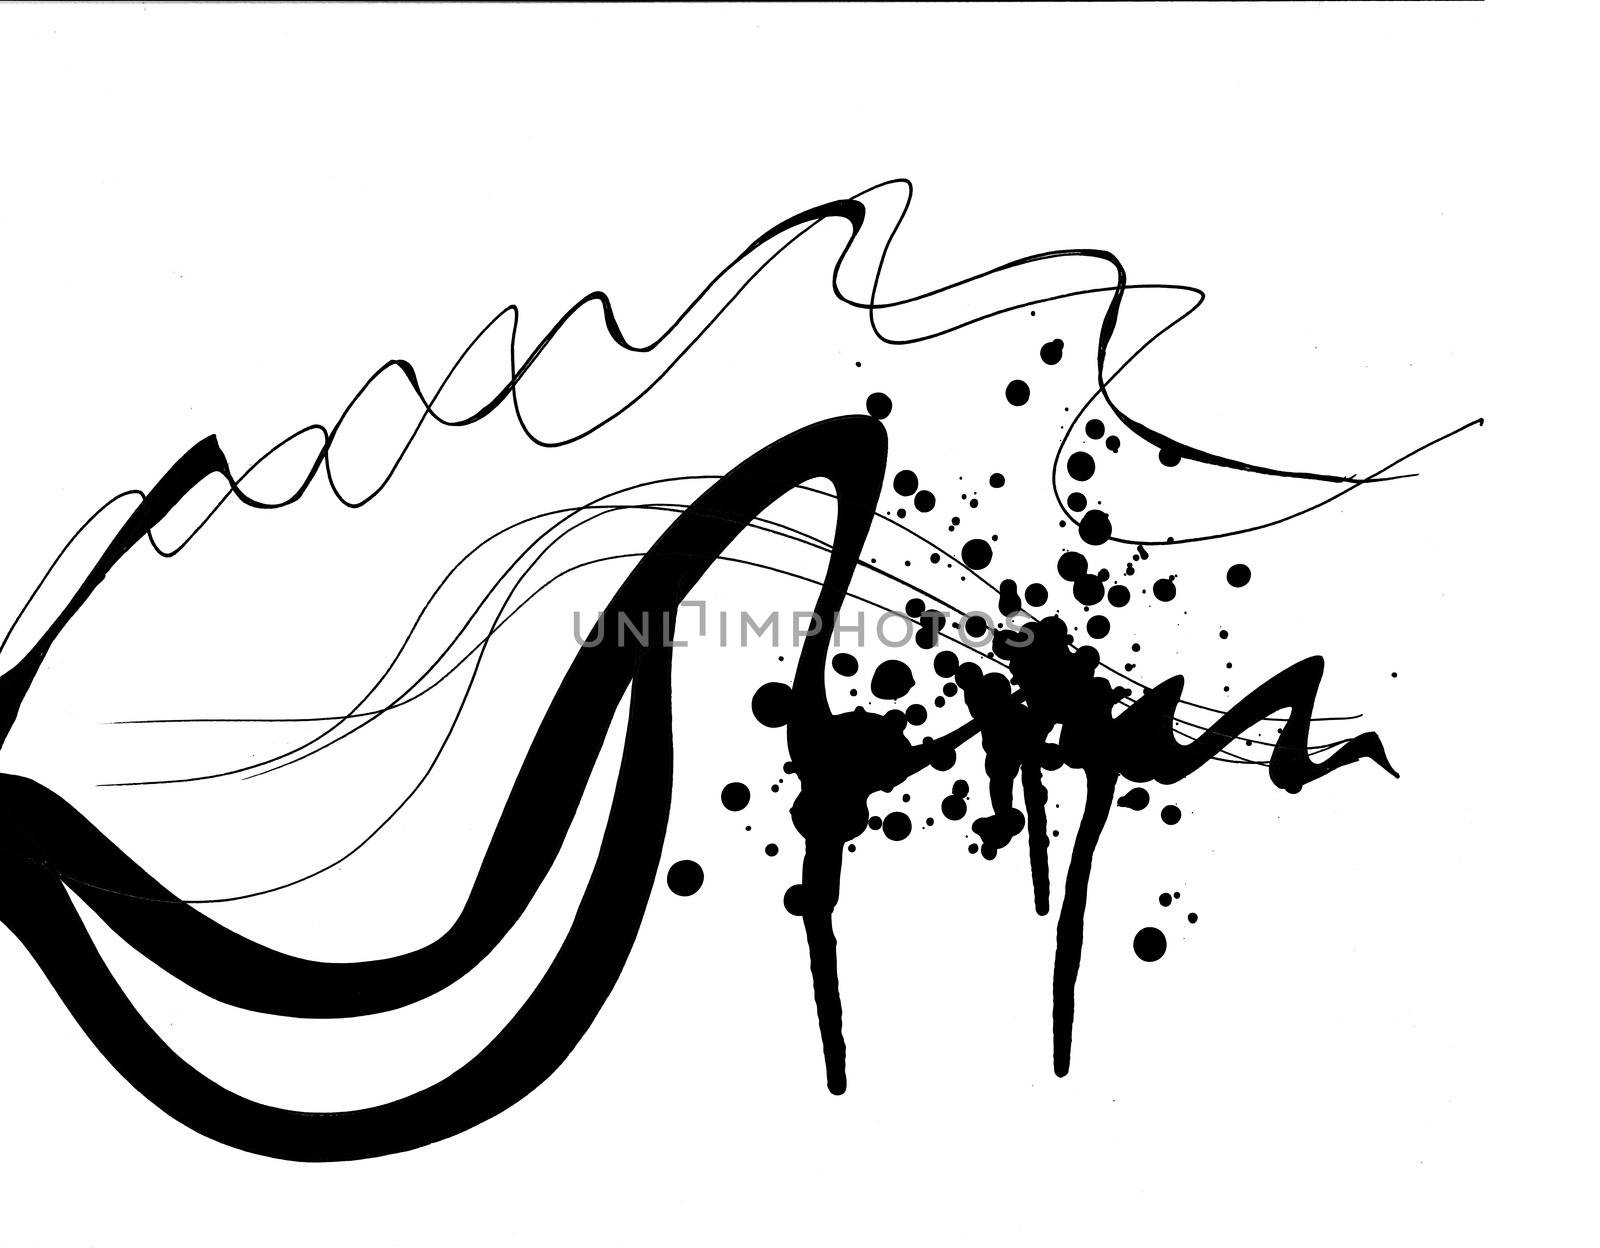 Line and ink splatters